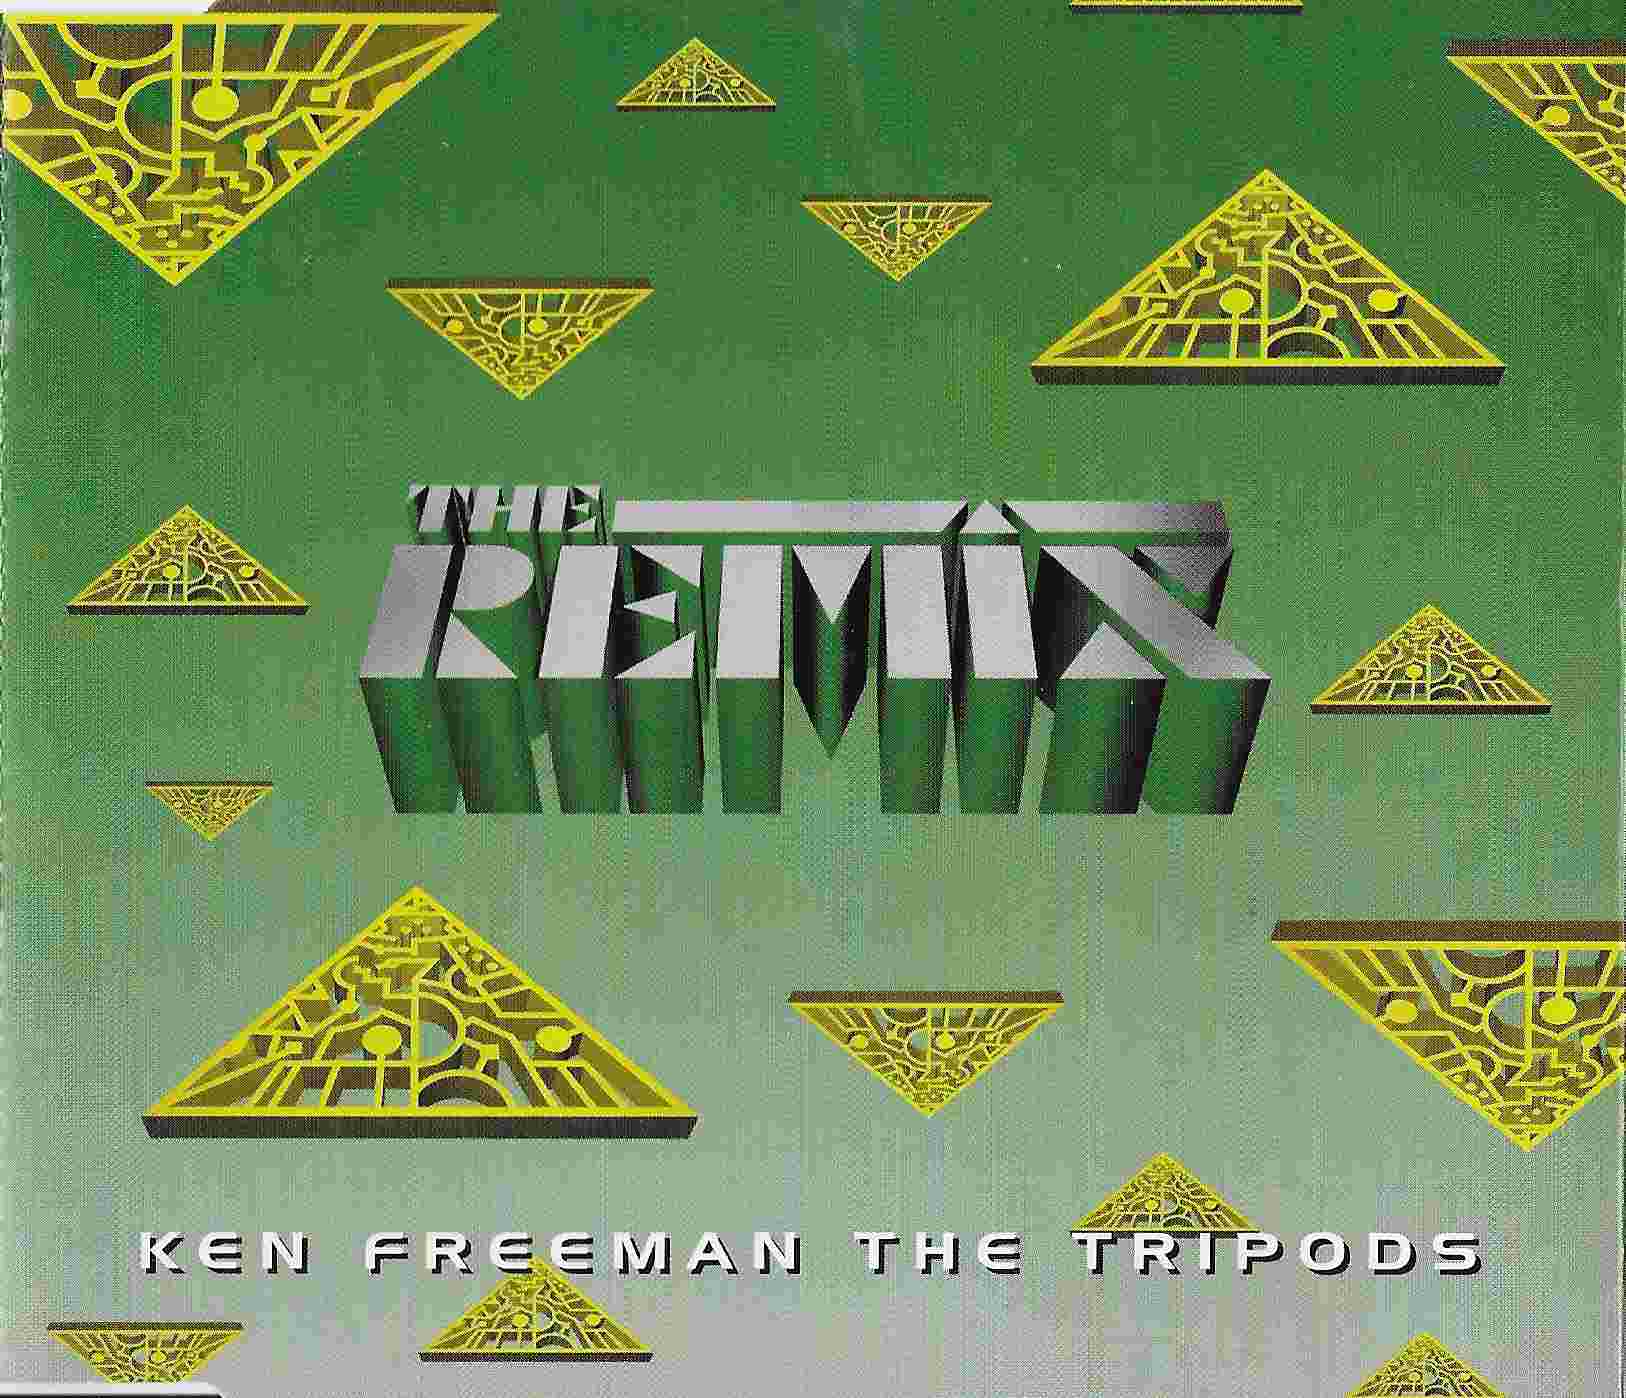 Picture of The tripods remix by artist Ken Freeman from the BBC cdsingles - Records and Tapes library